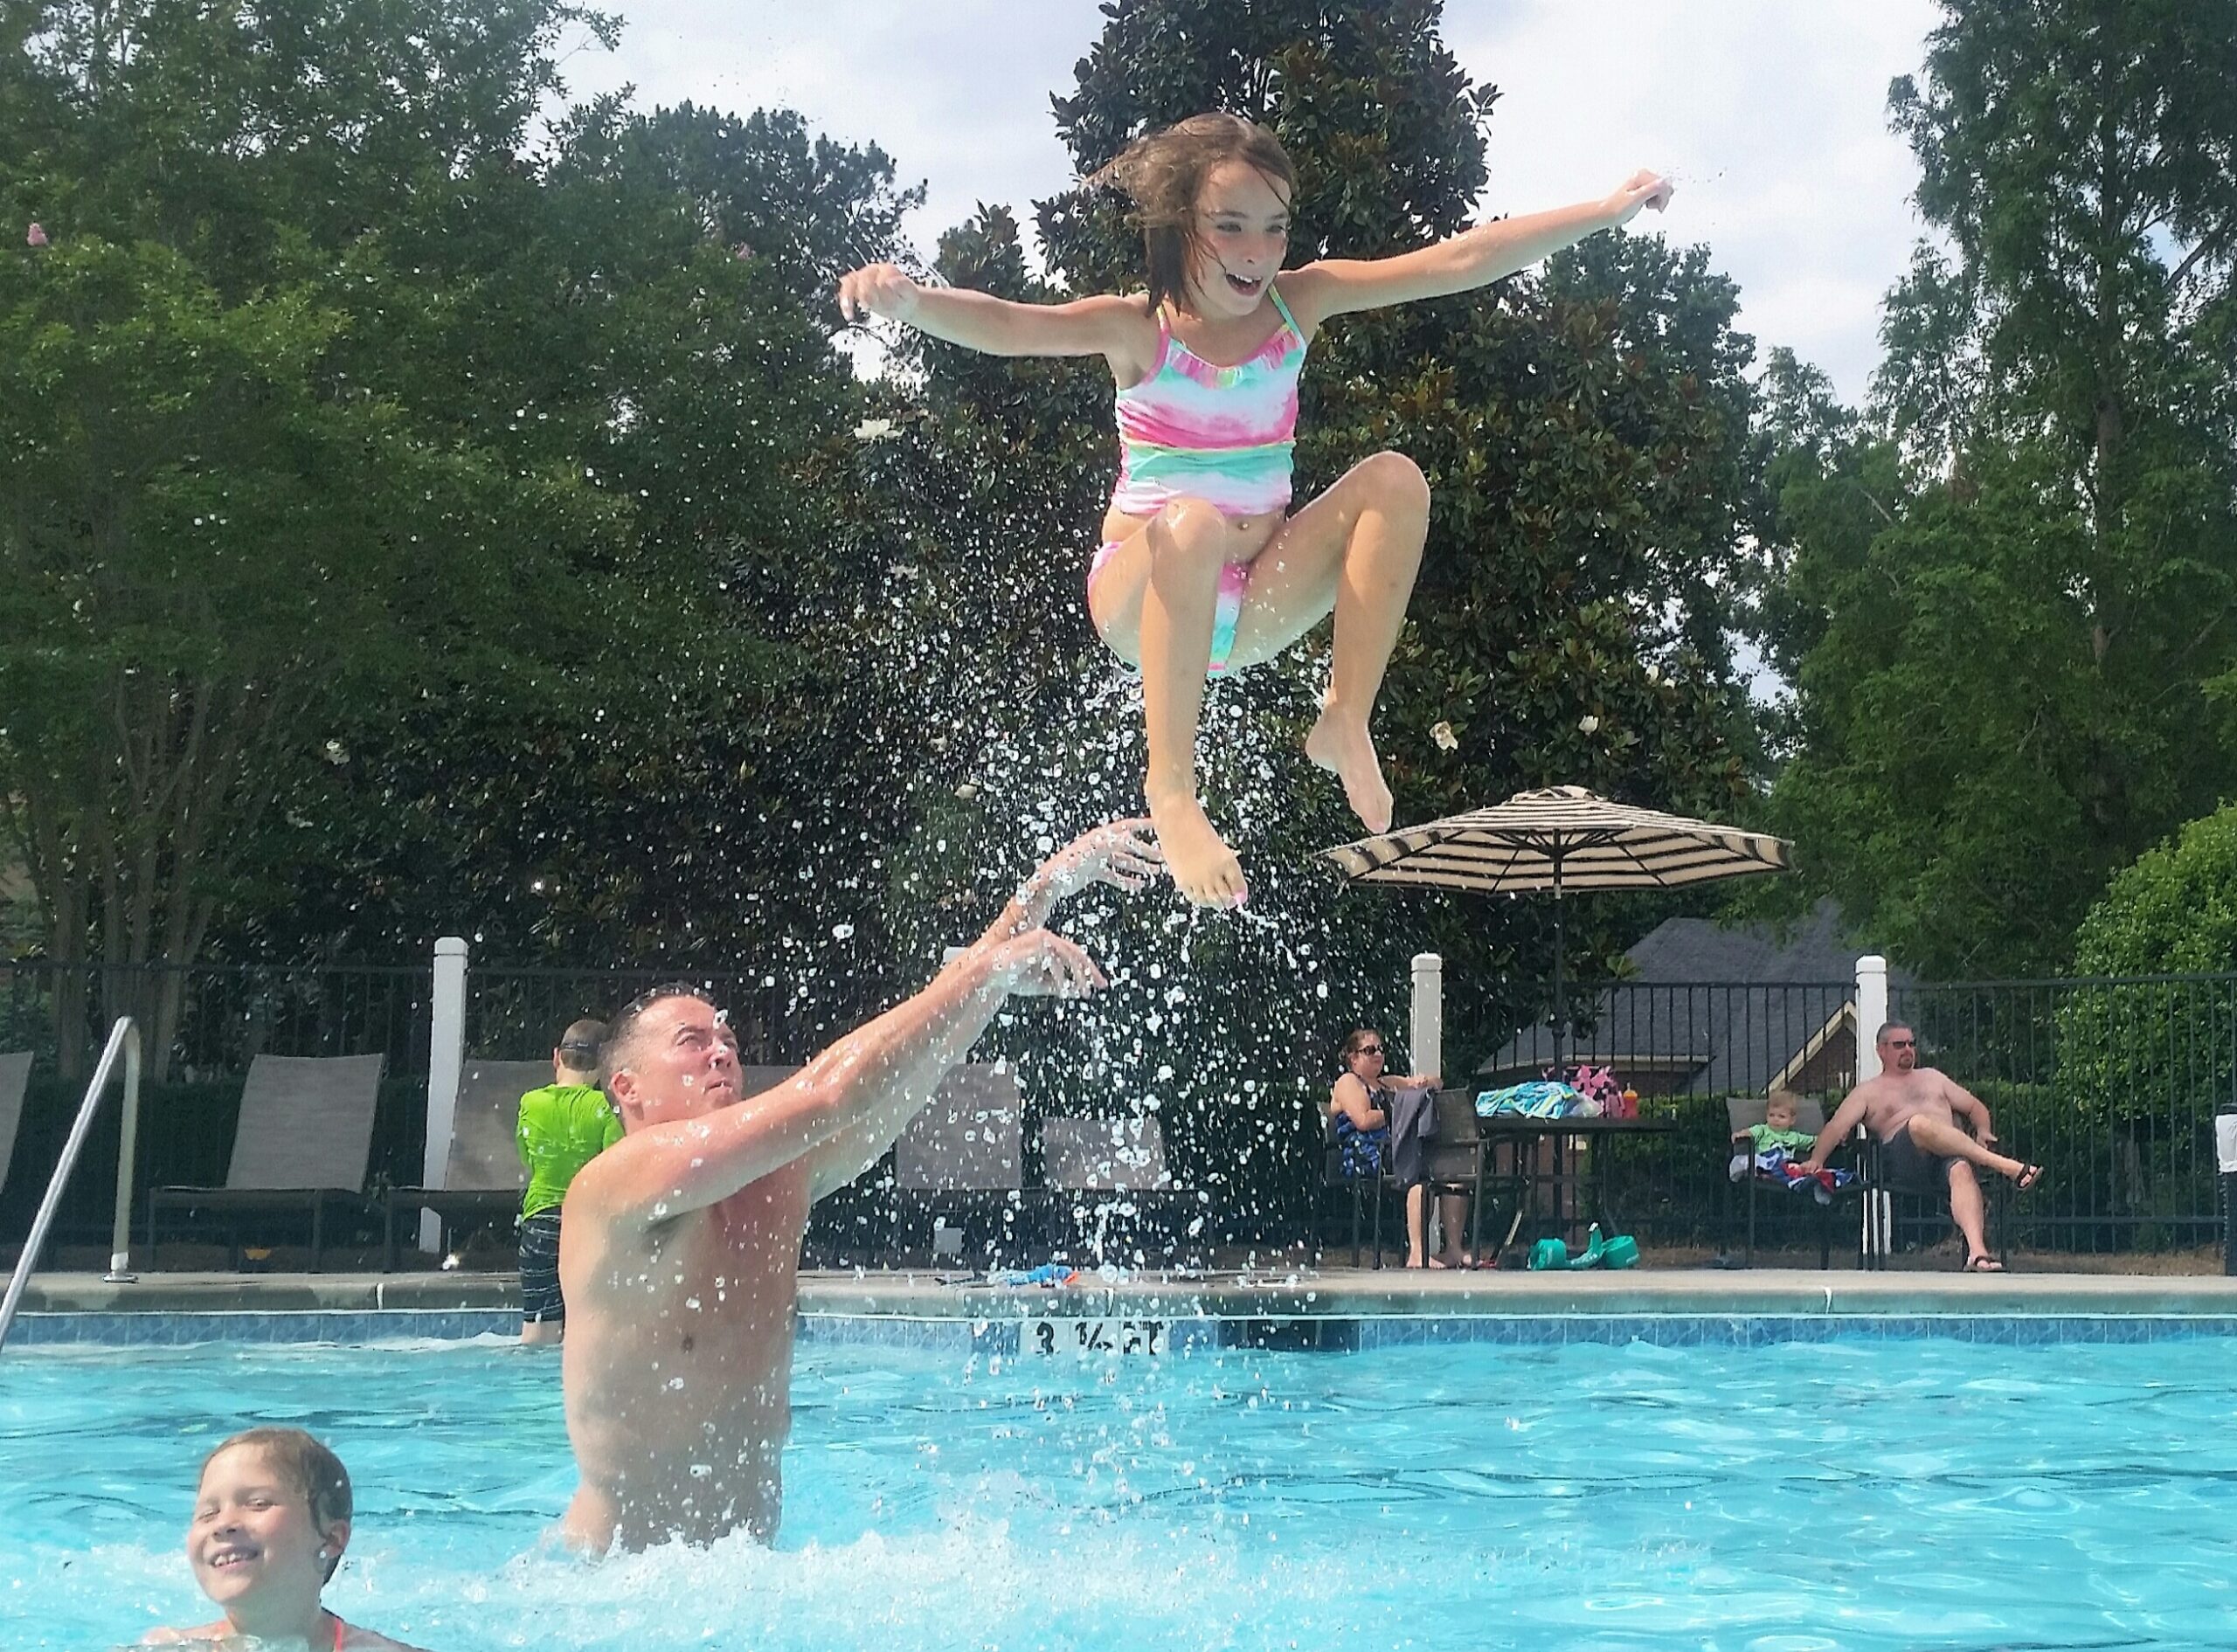 Dad throwing his daughter into the pool